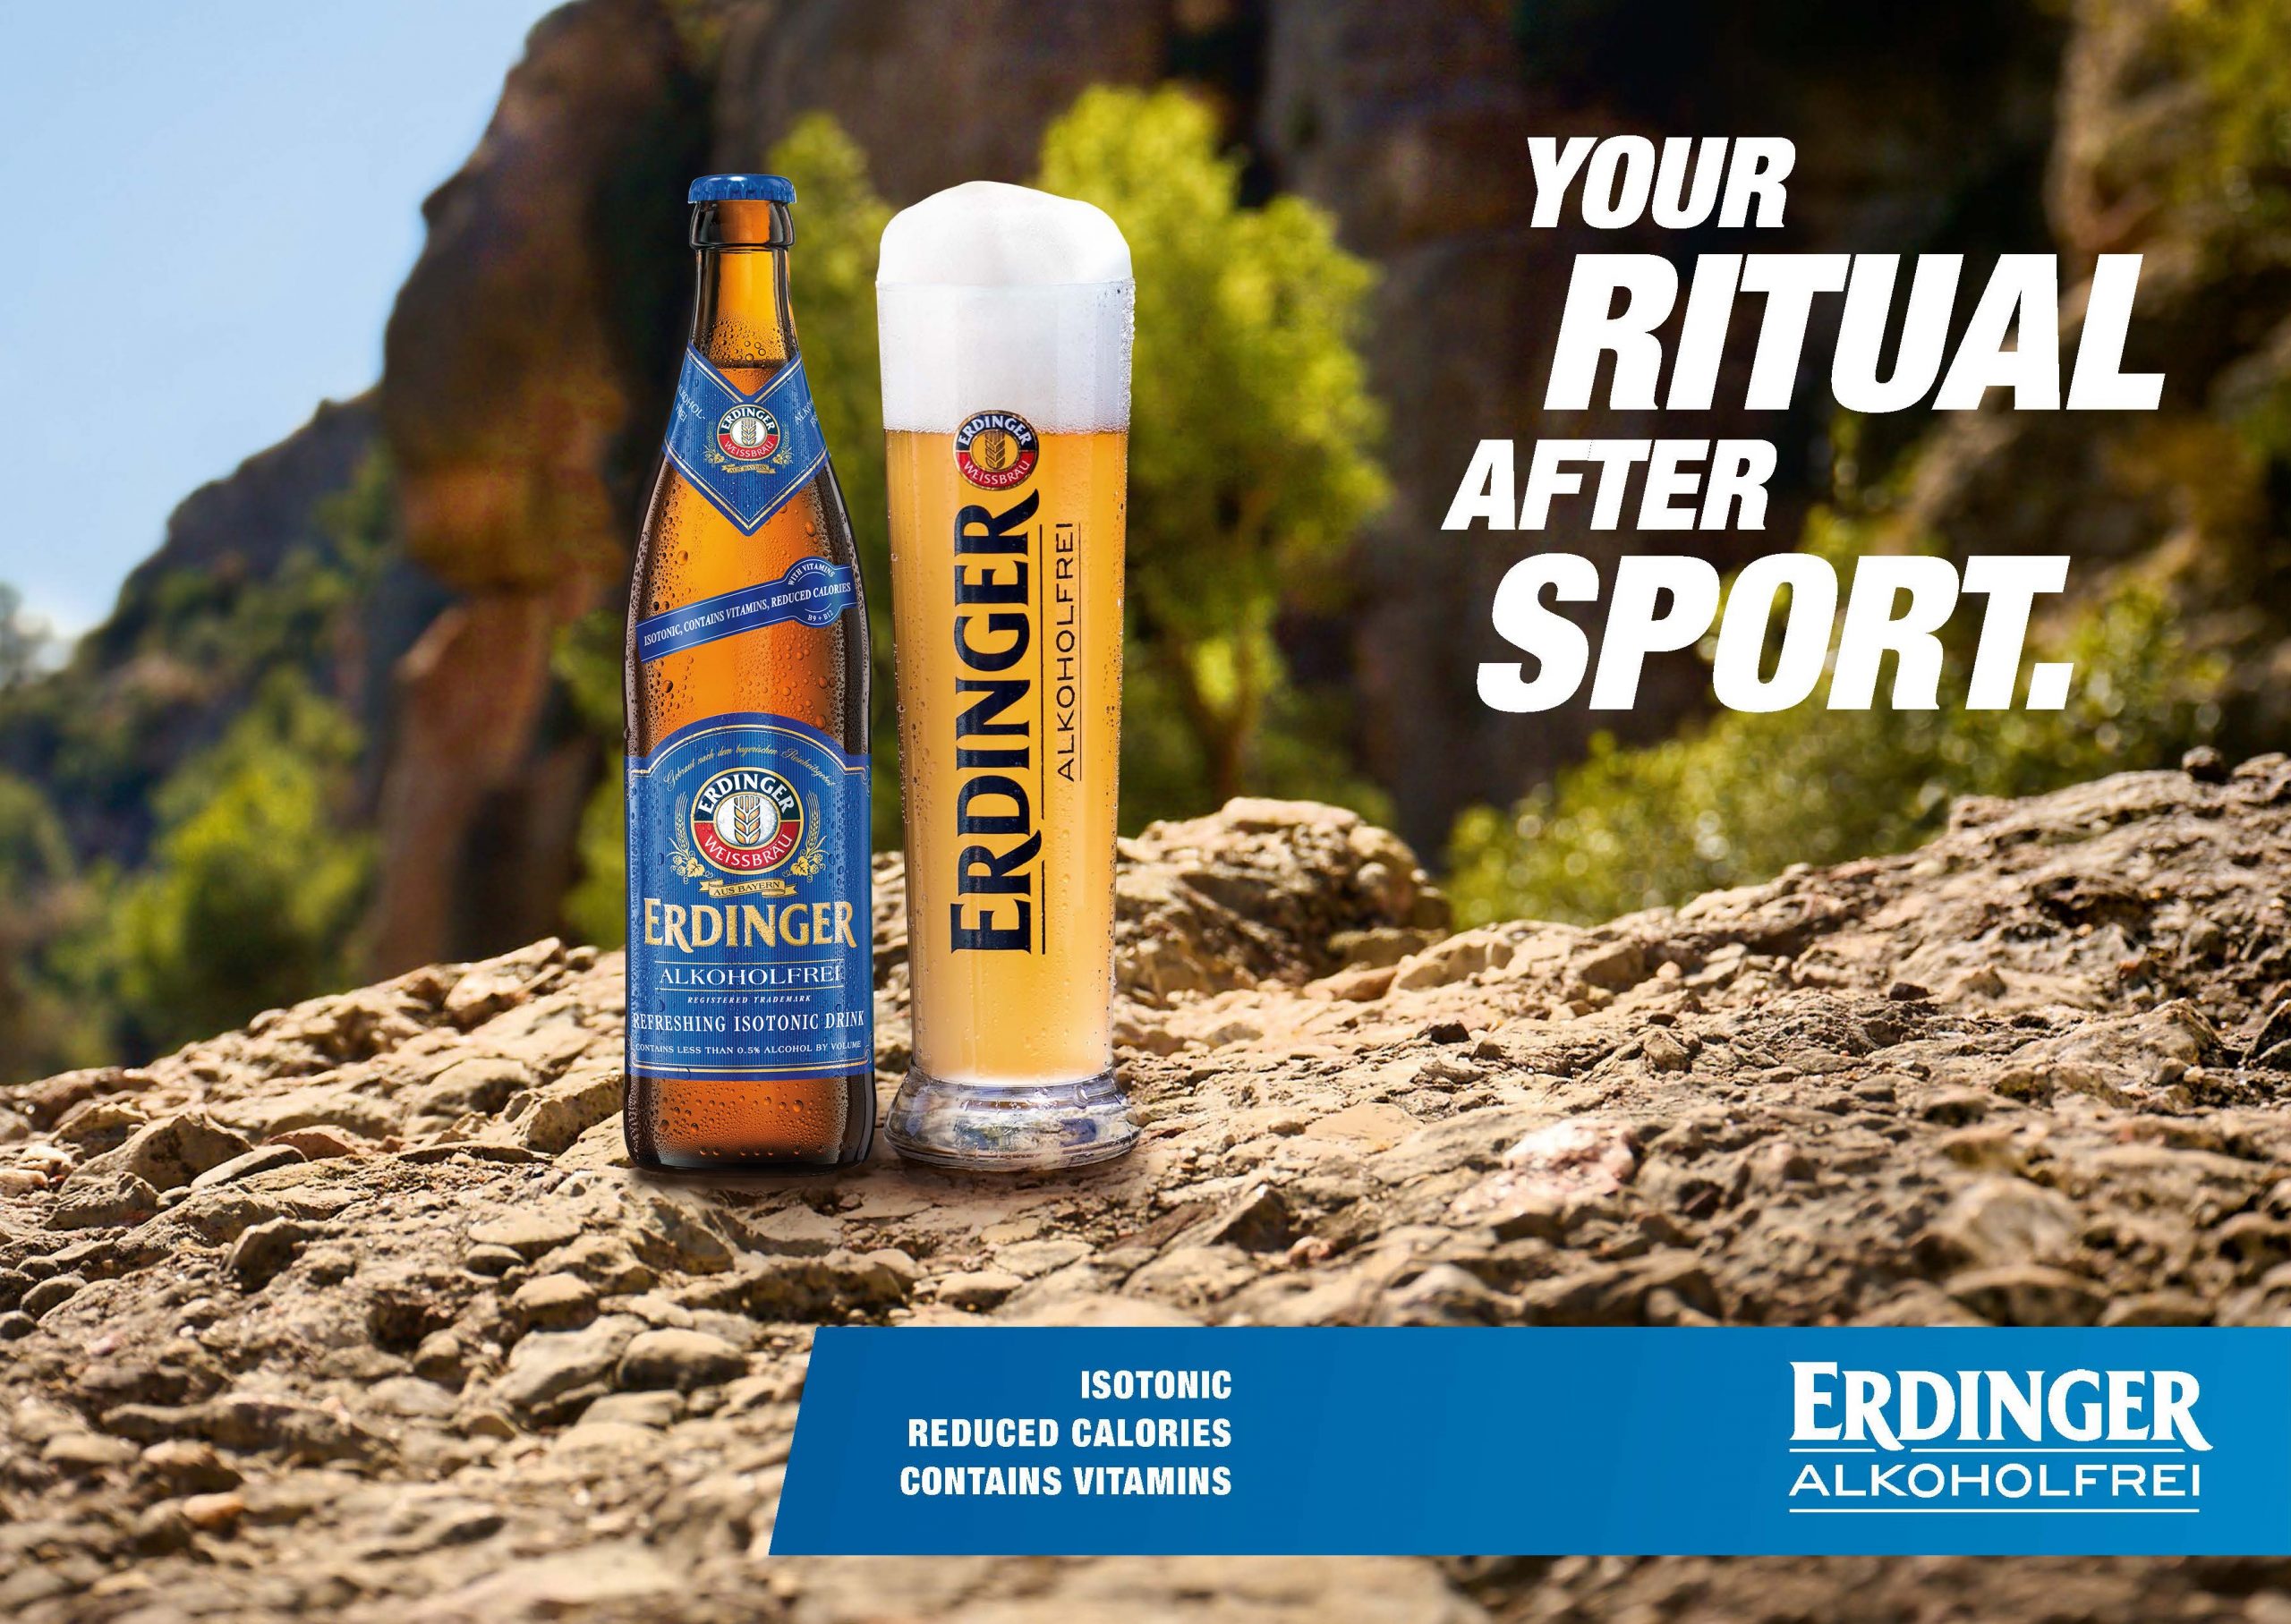 Erdinger Alkoholfrei launches promo to support sporting rituals campaign